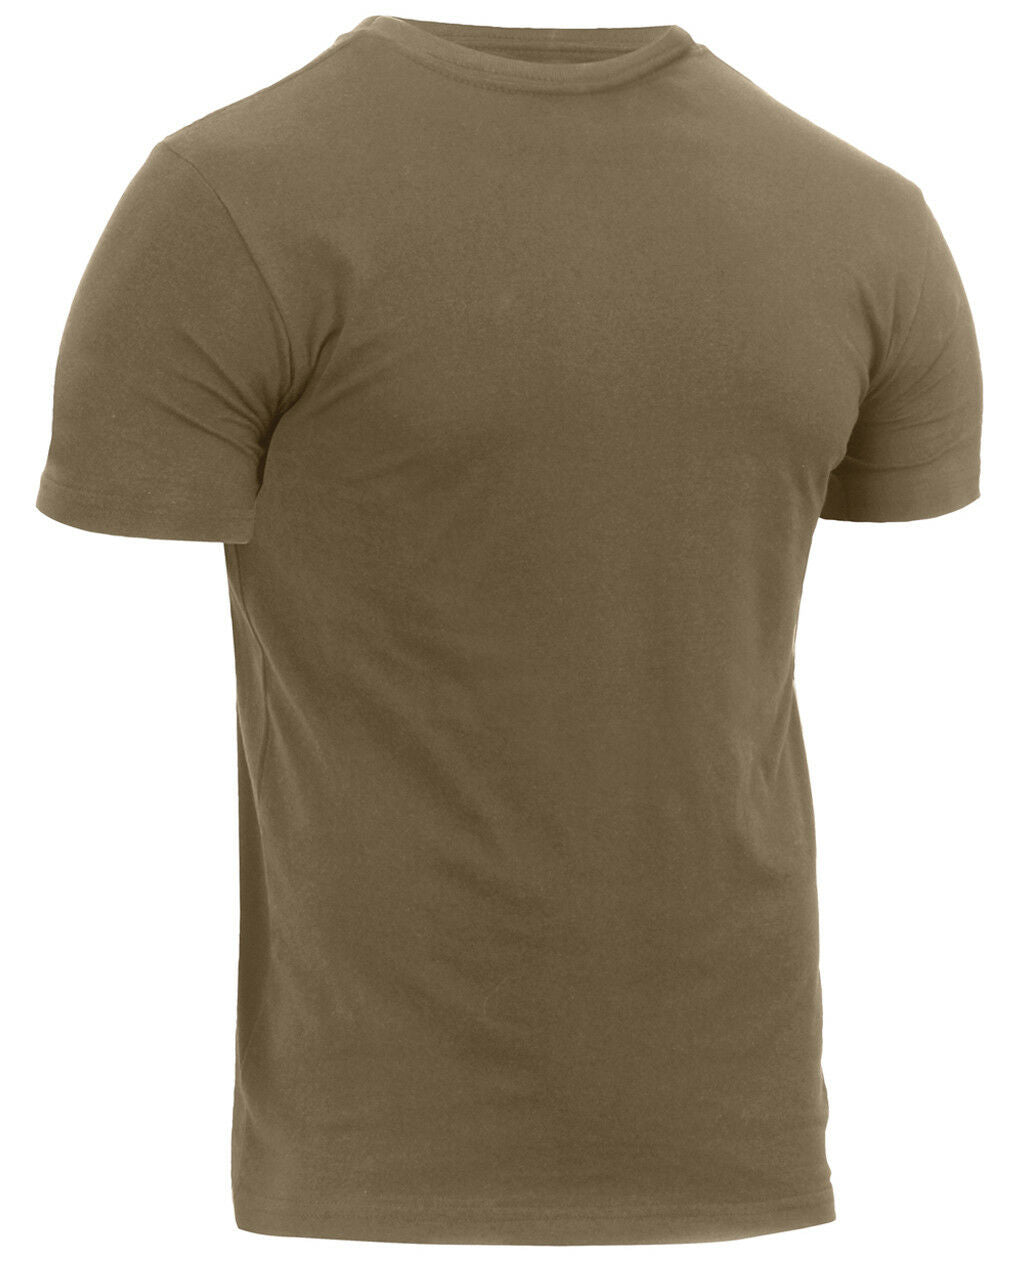 Rothco Athletic Fit Solid Color Military T-Shirt - AR 670-1 Coyote Brown